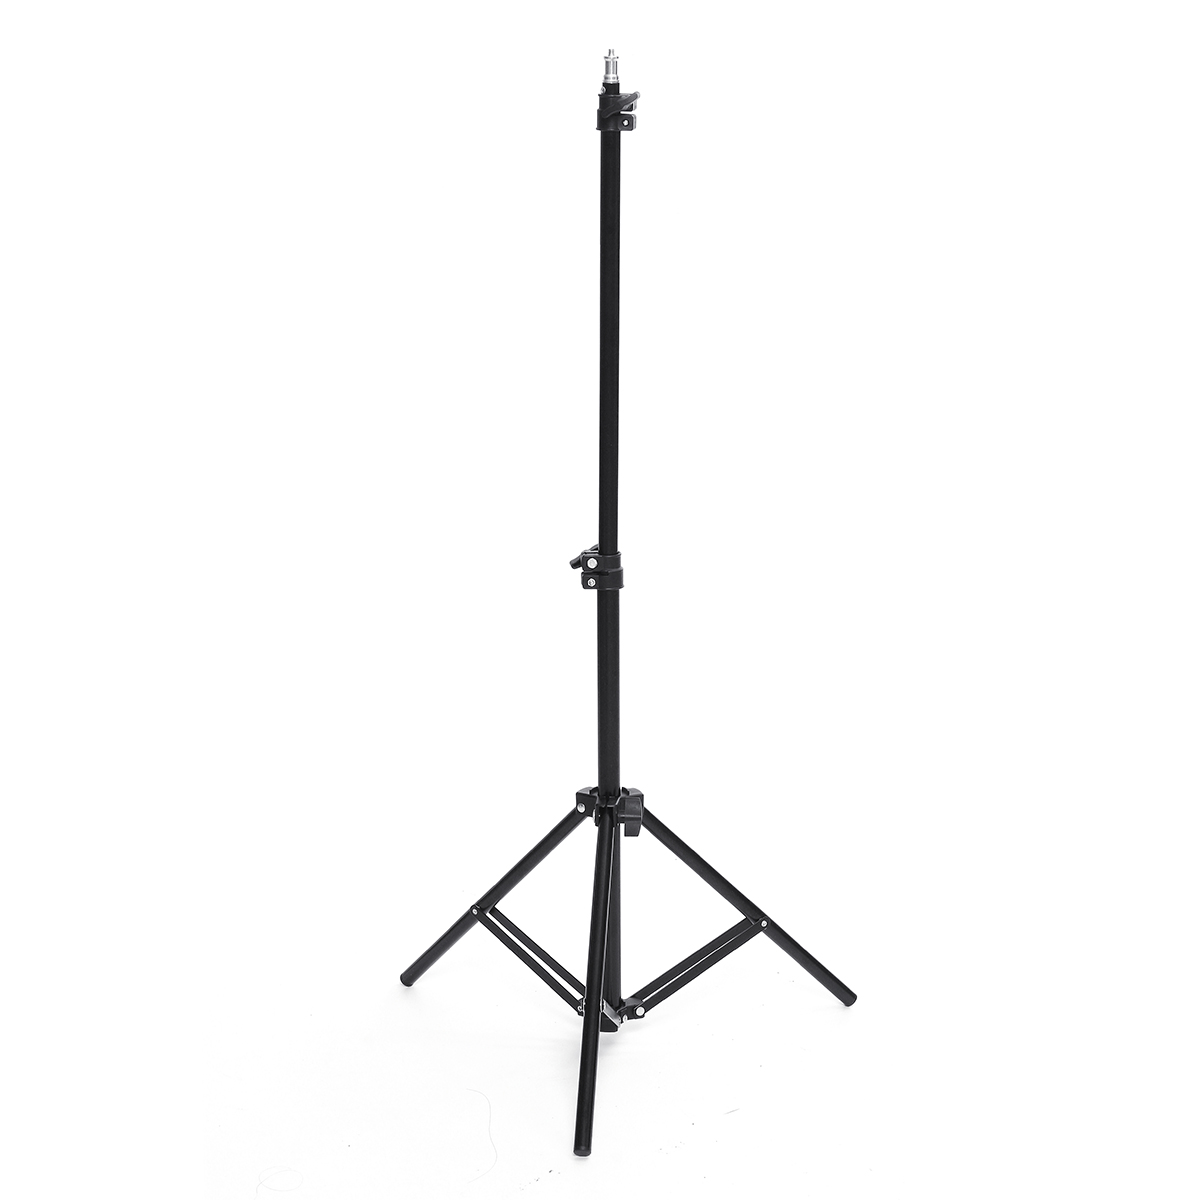 50160cm-Foldable-Portable-Camera-Tripod-Video-Ring-Light-Flash-Stand-Phone-Holder-For-Live-Stream-Ma-1627474-6